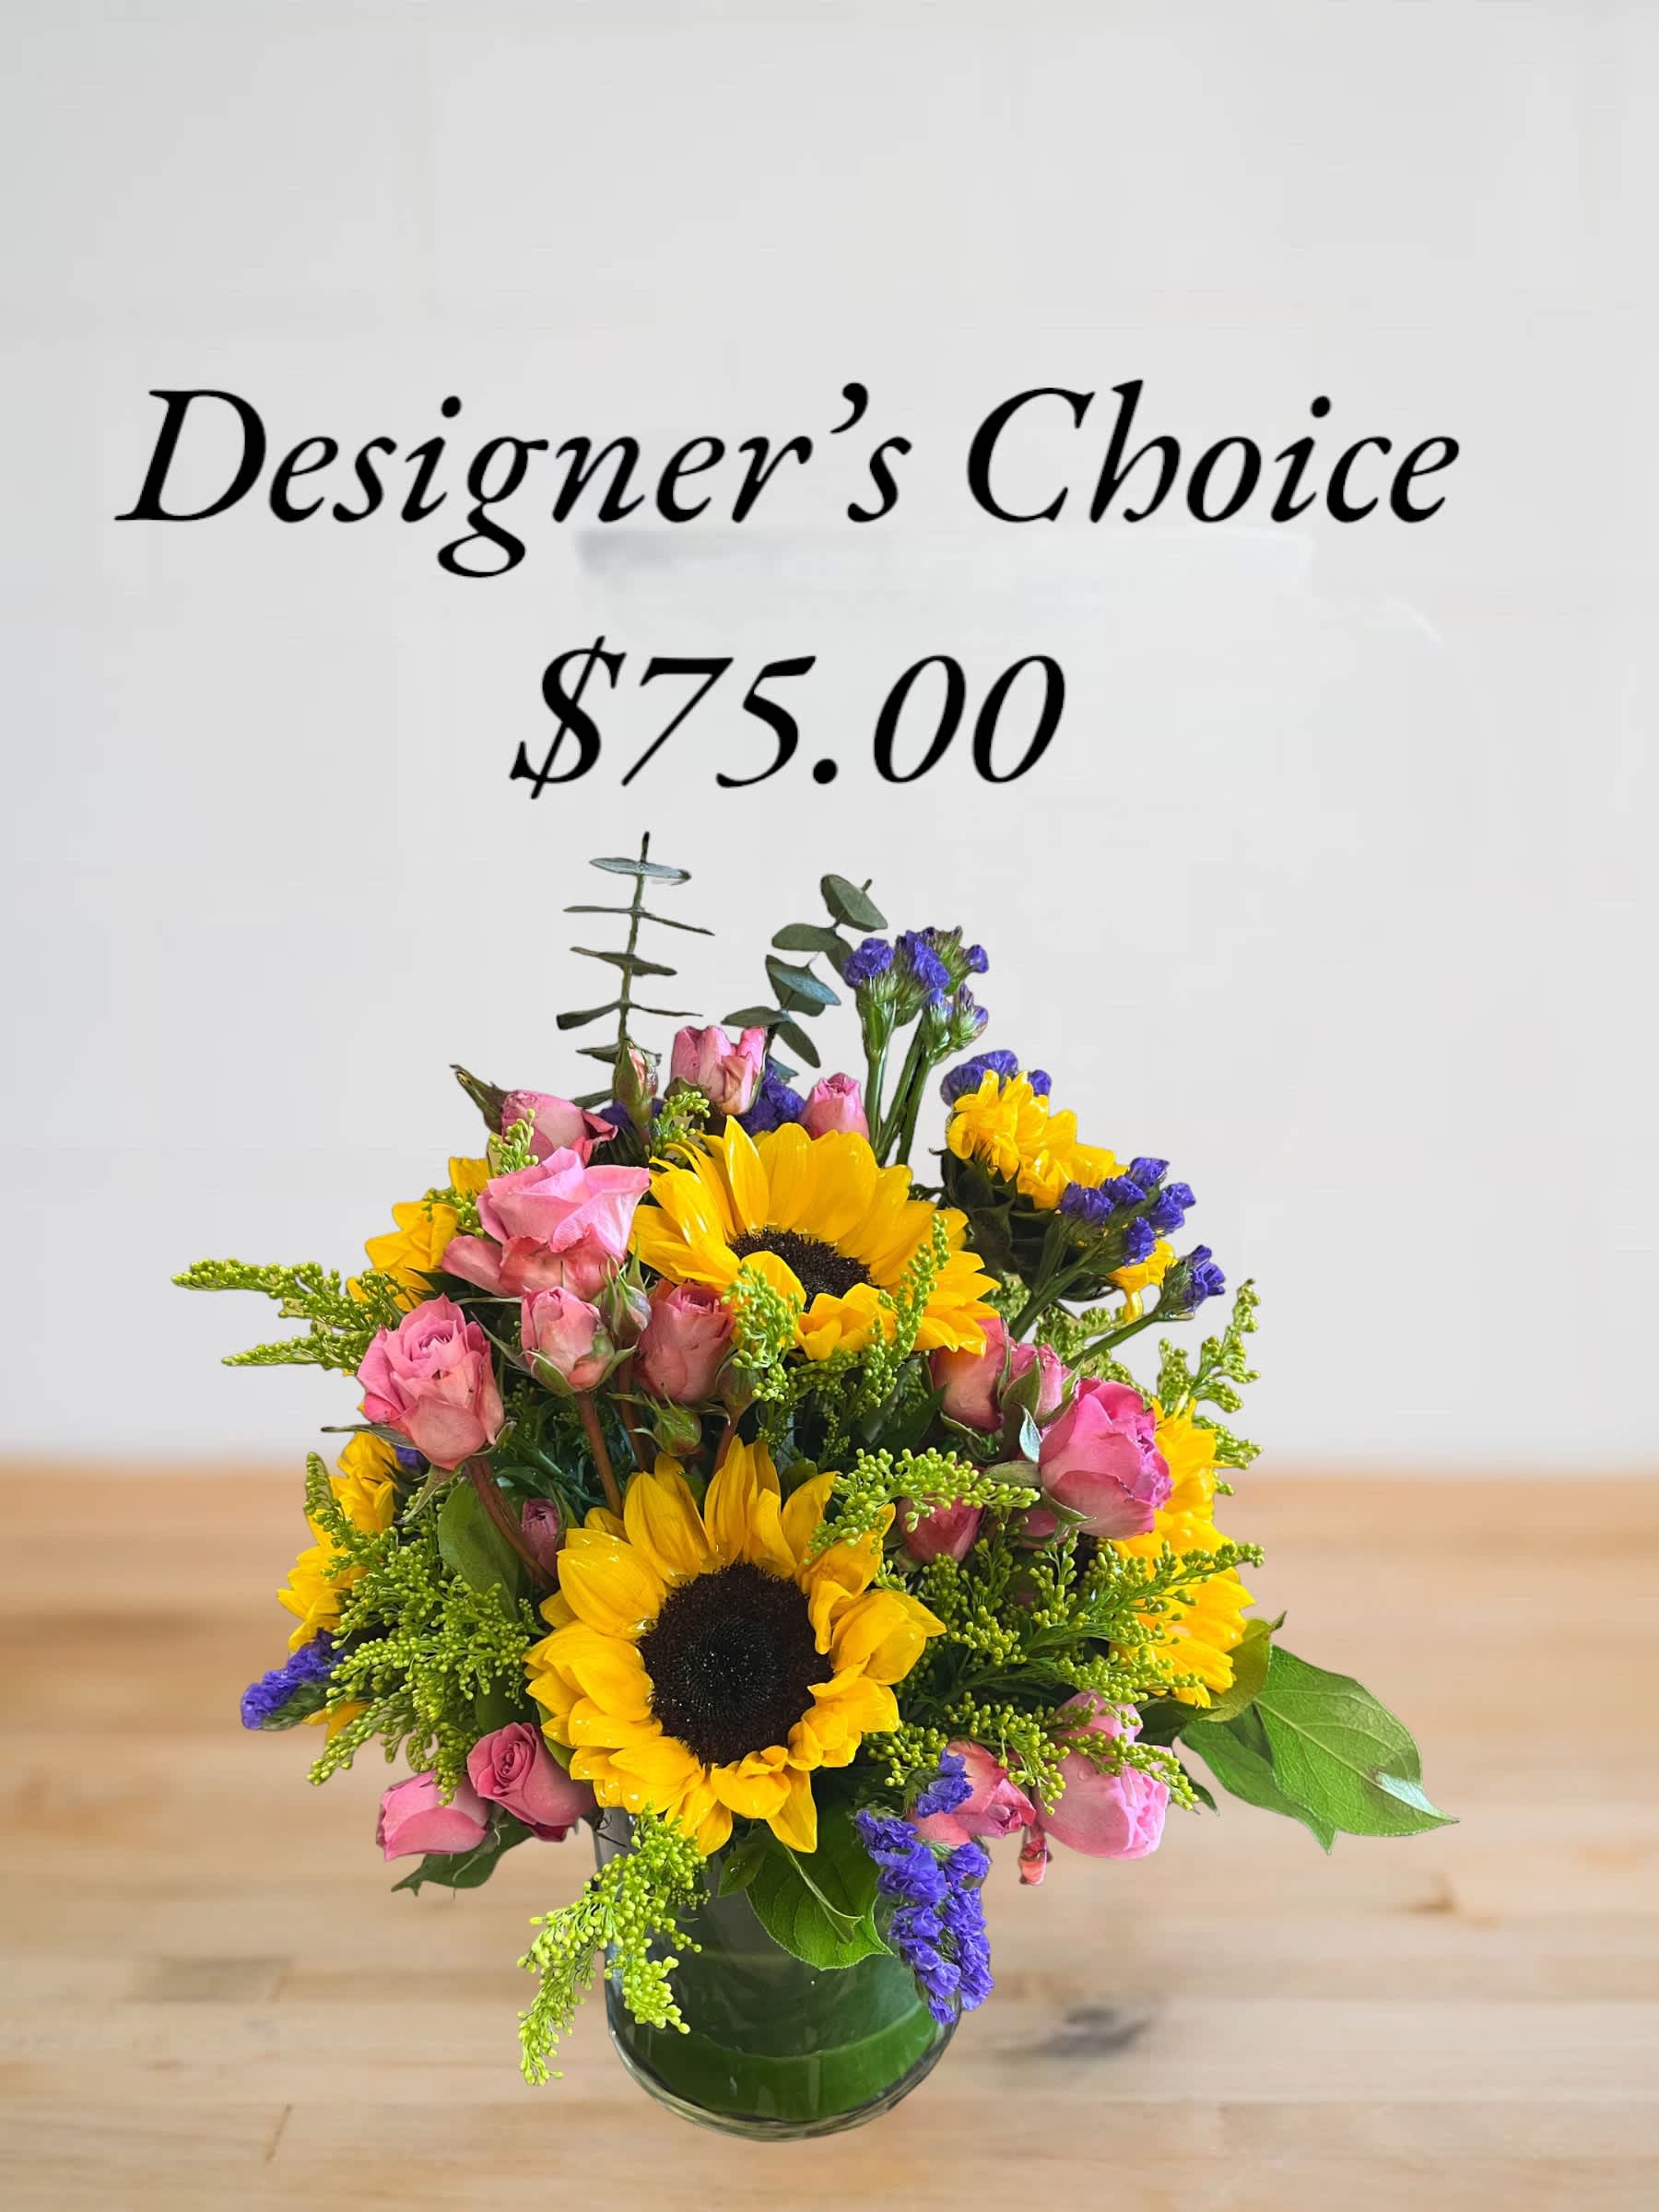 Designer's Choice - Mix of the freshest blooms available, as chosen by the designer.